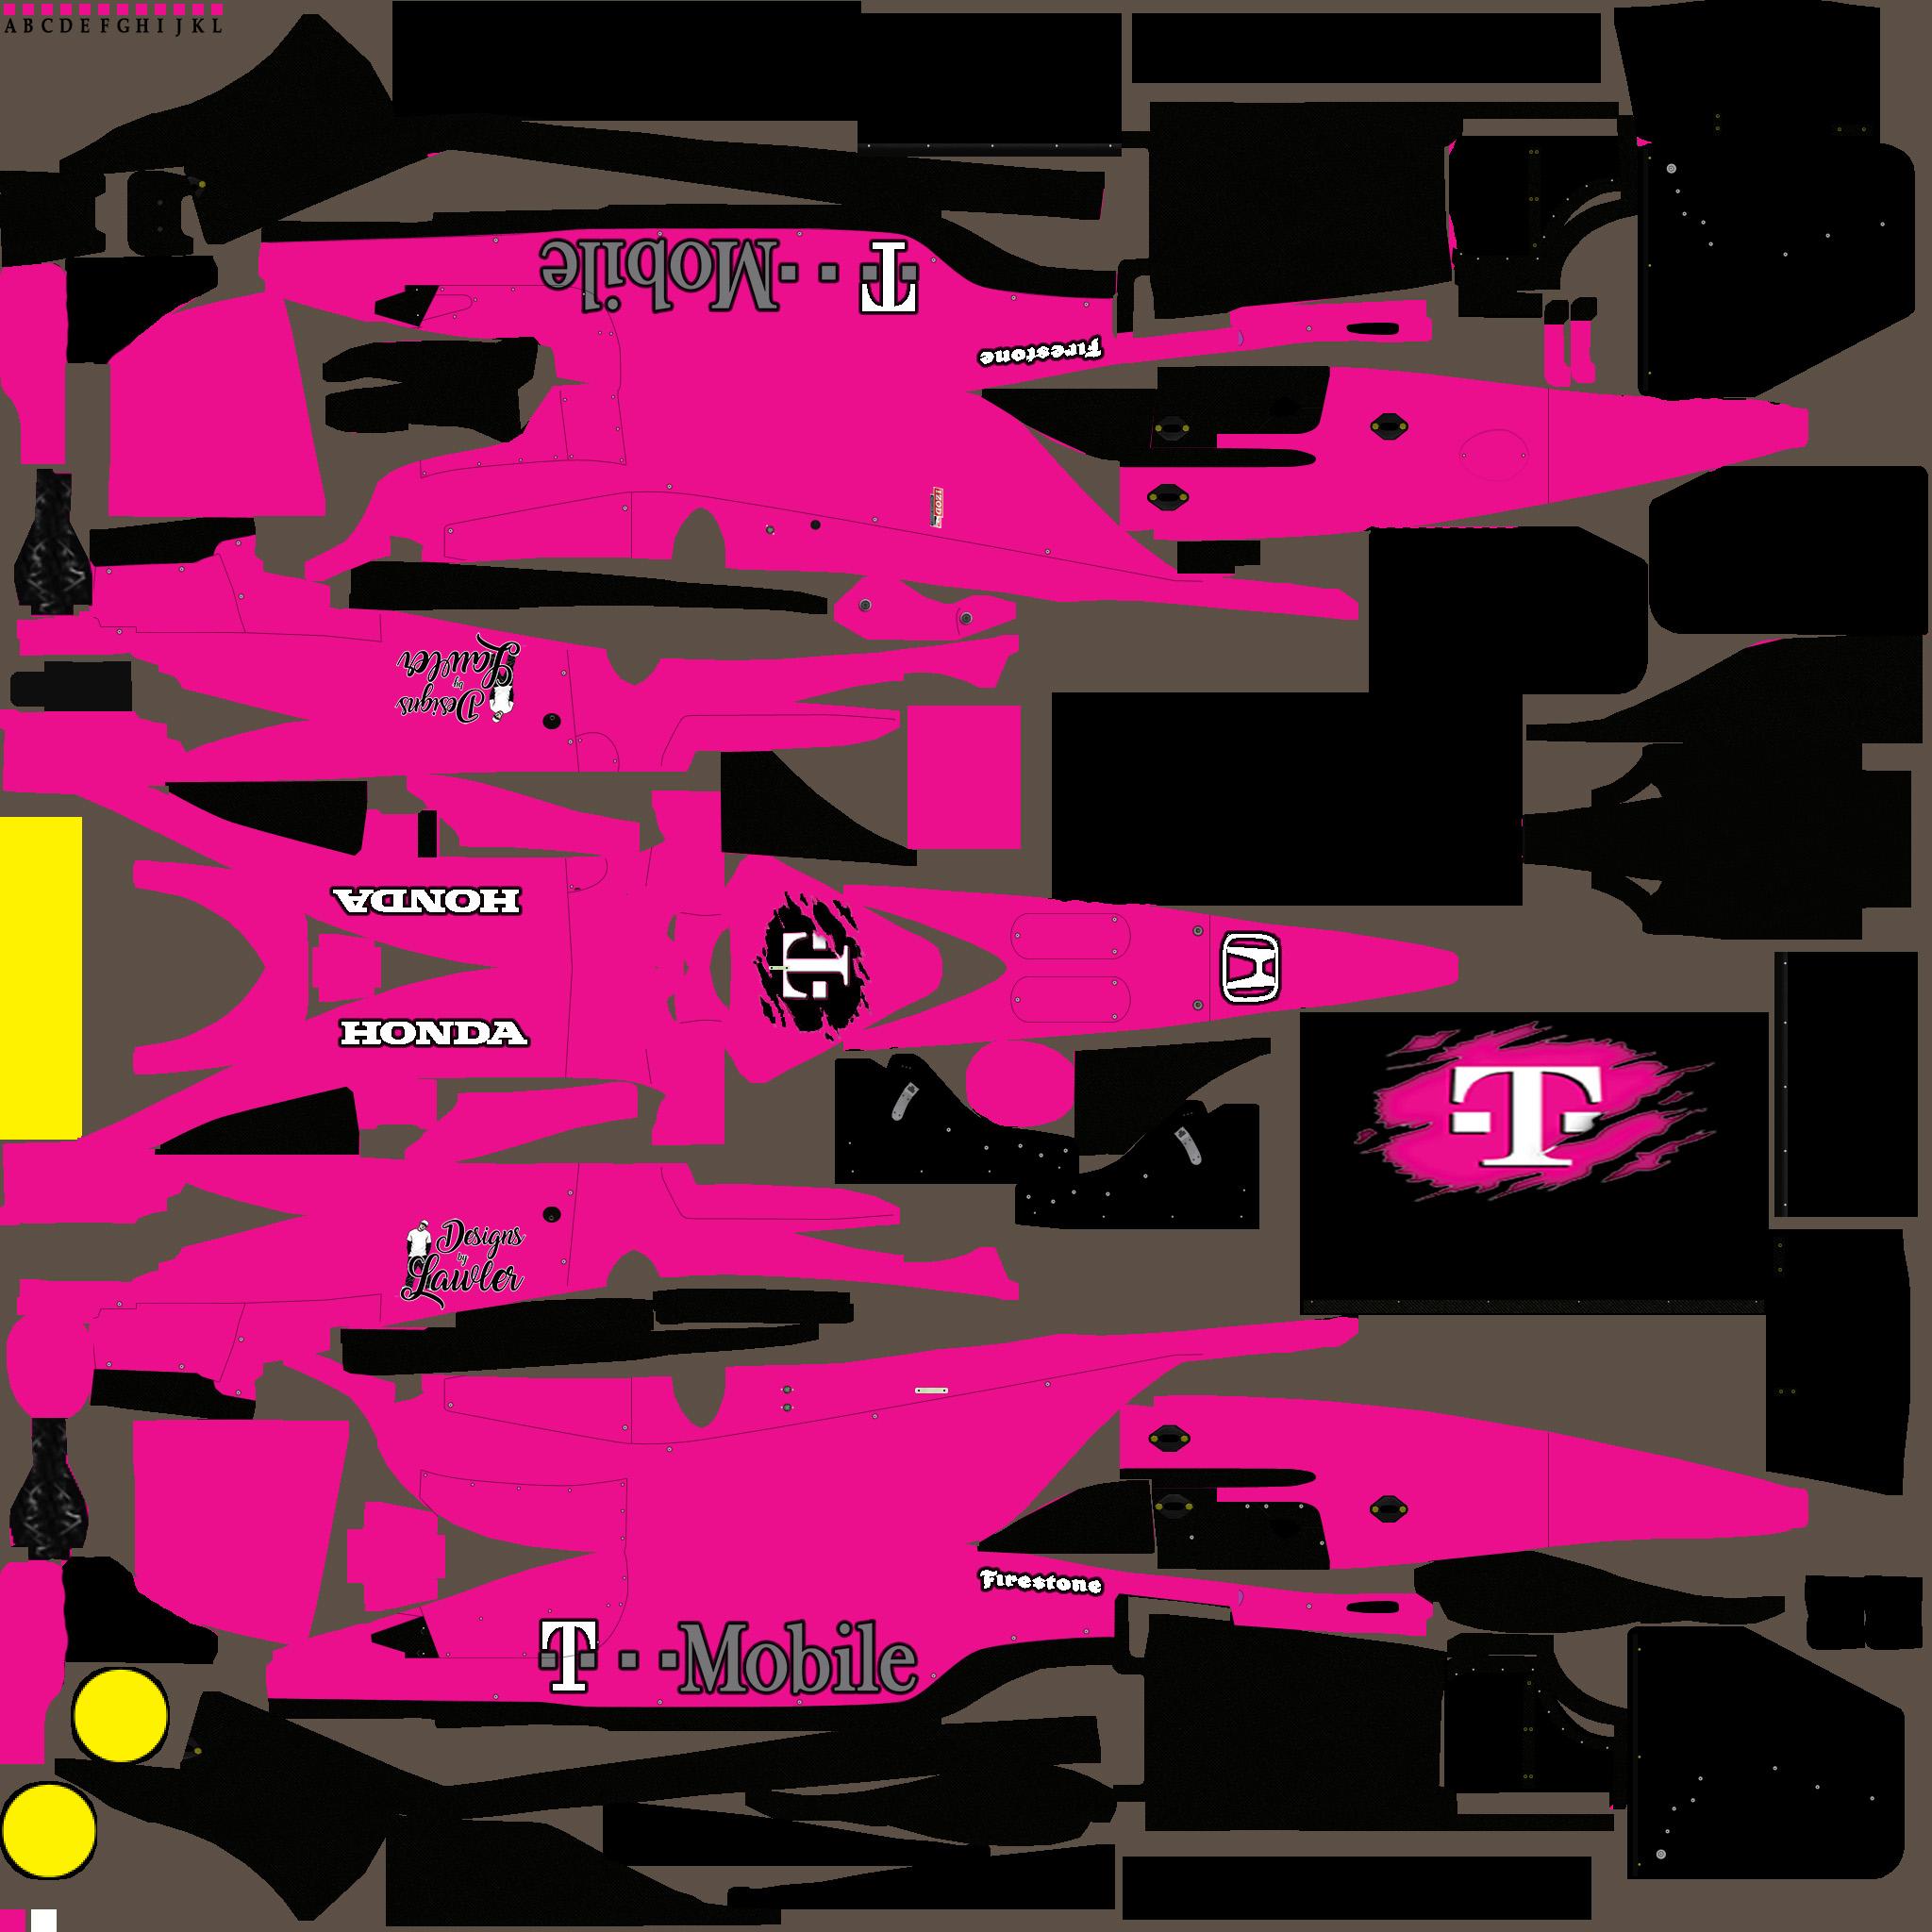 Preview of IRL Dallara   T - Mobile Pink by Michael Lawler